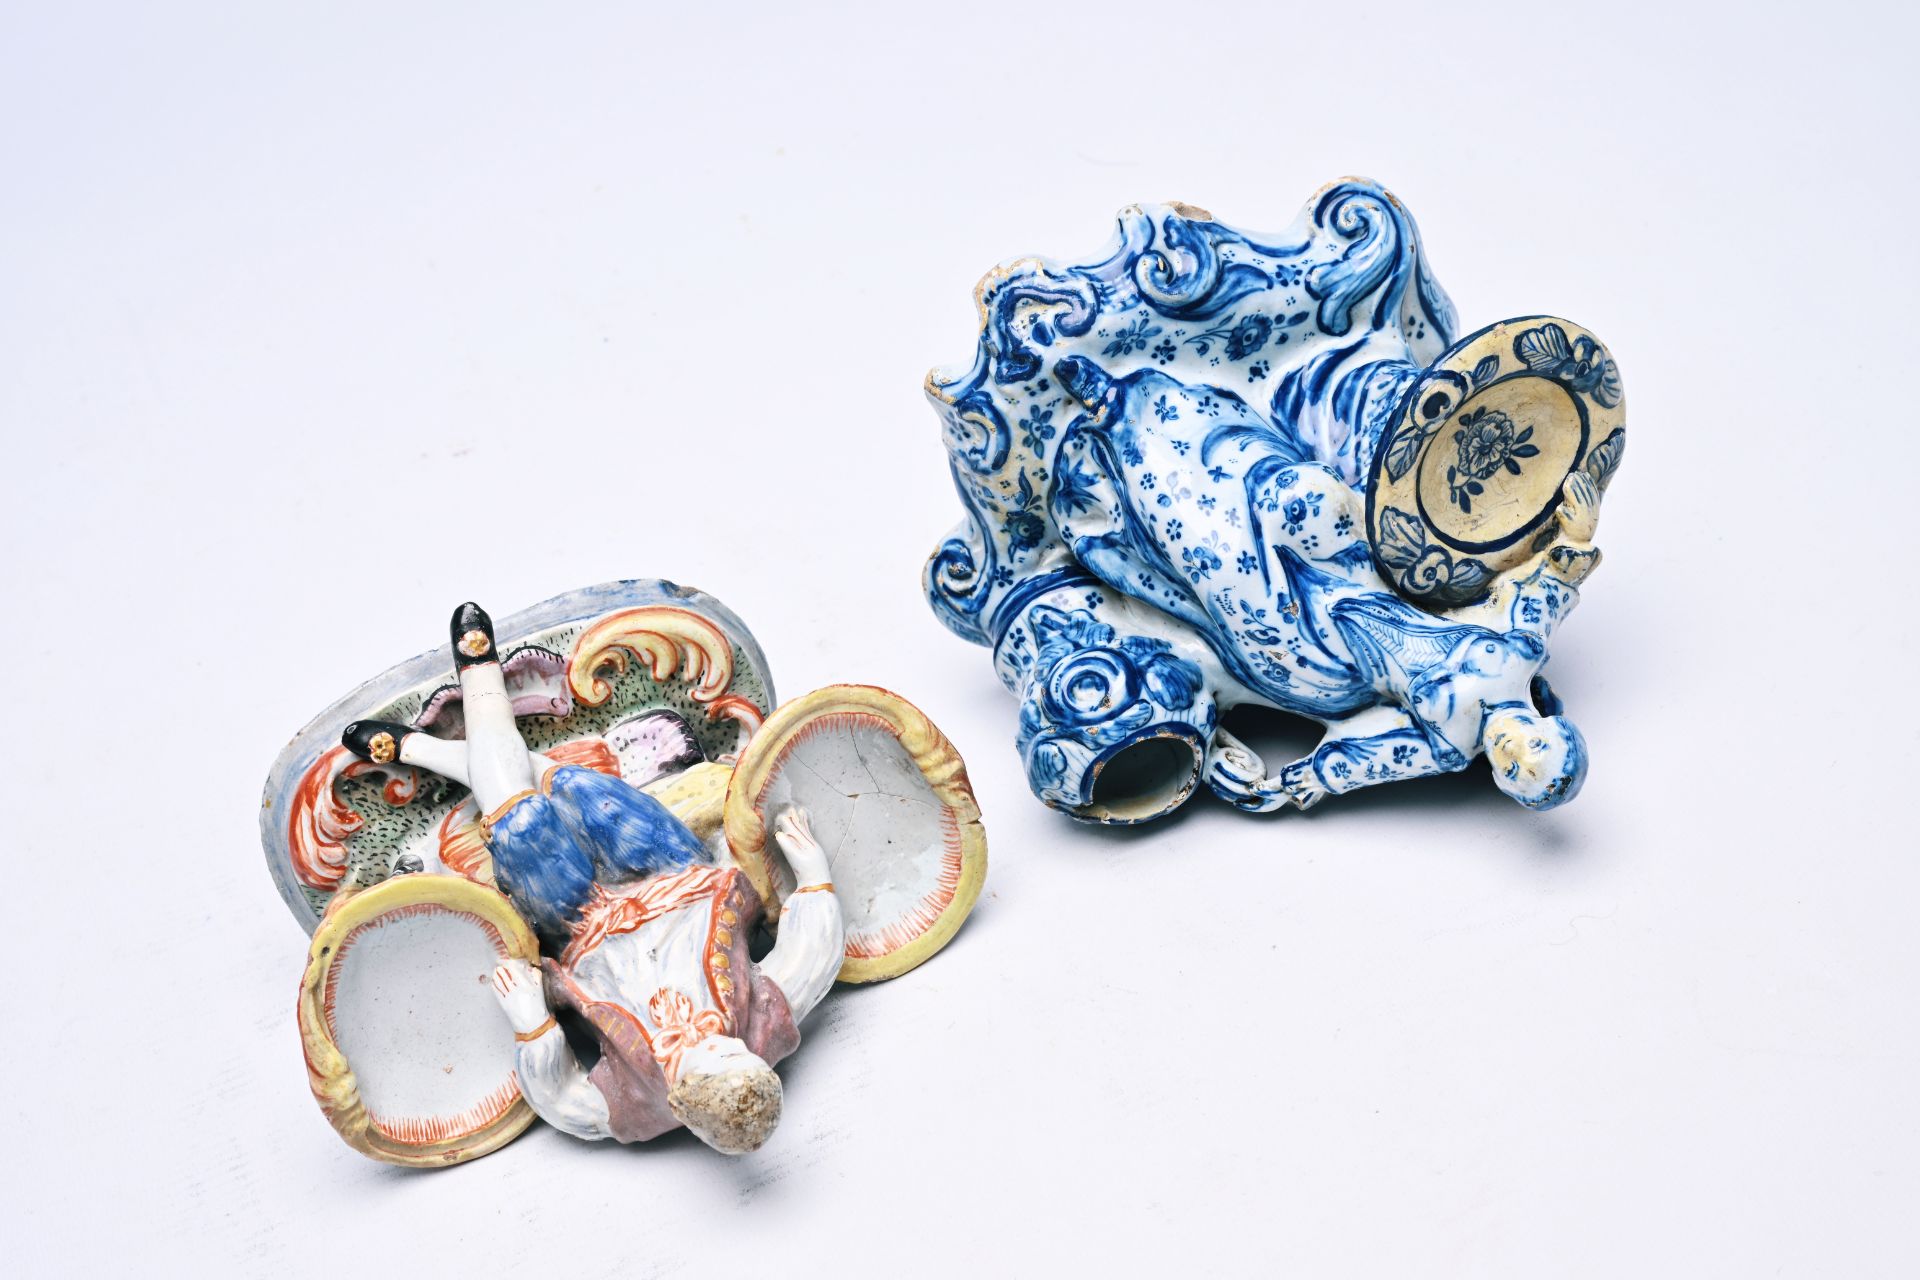 Two Dutch Delft blue and white and polychrome salts in the form of a man and a woman, 18th/19th C. - Image 5 of 6